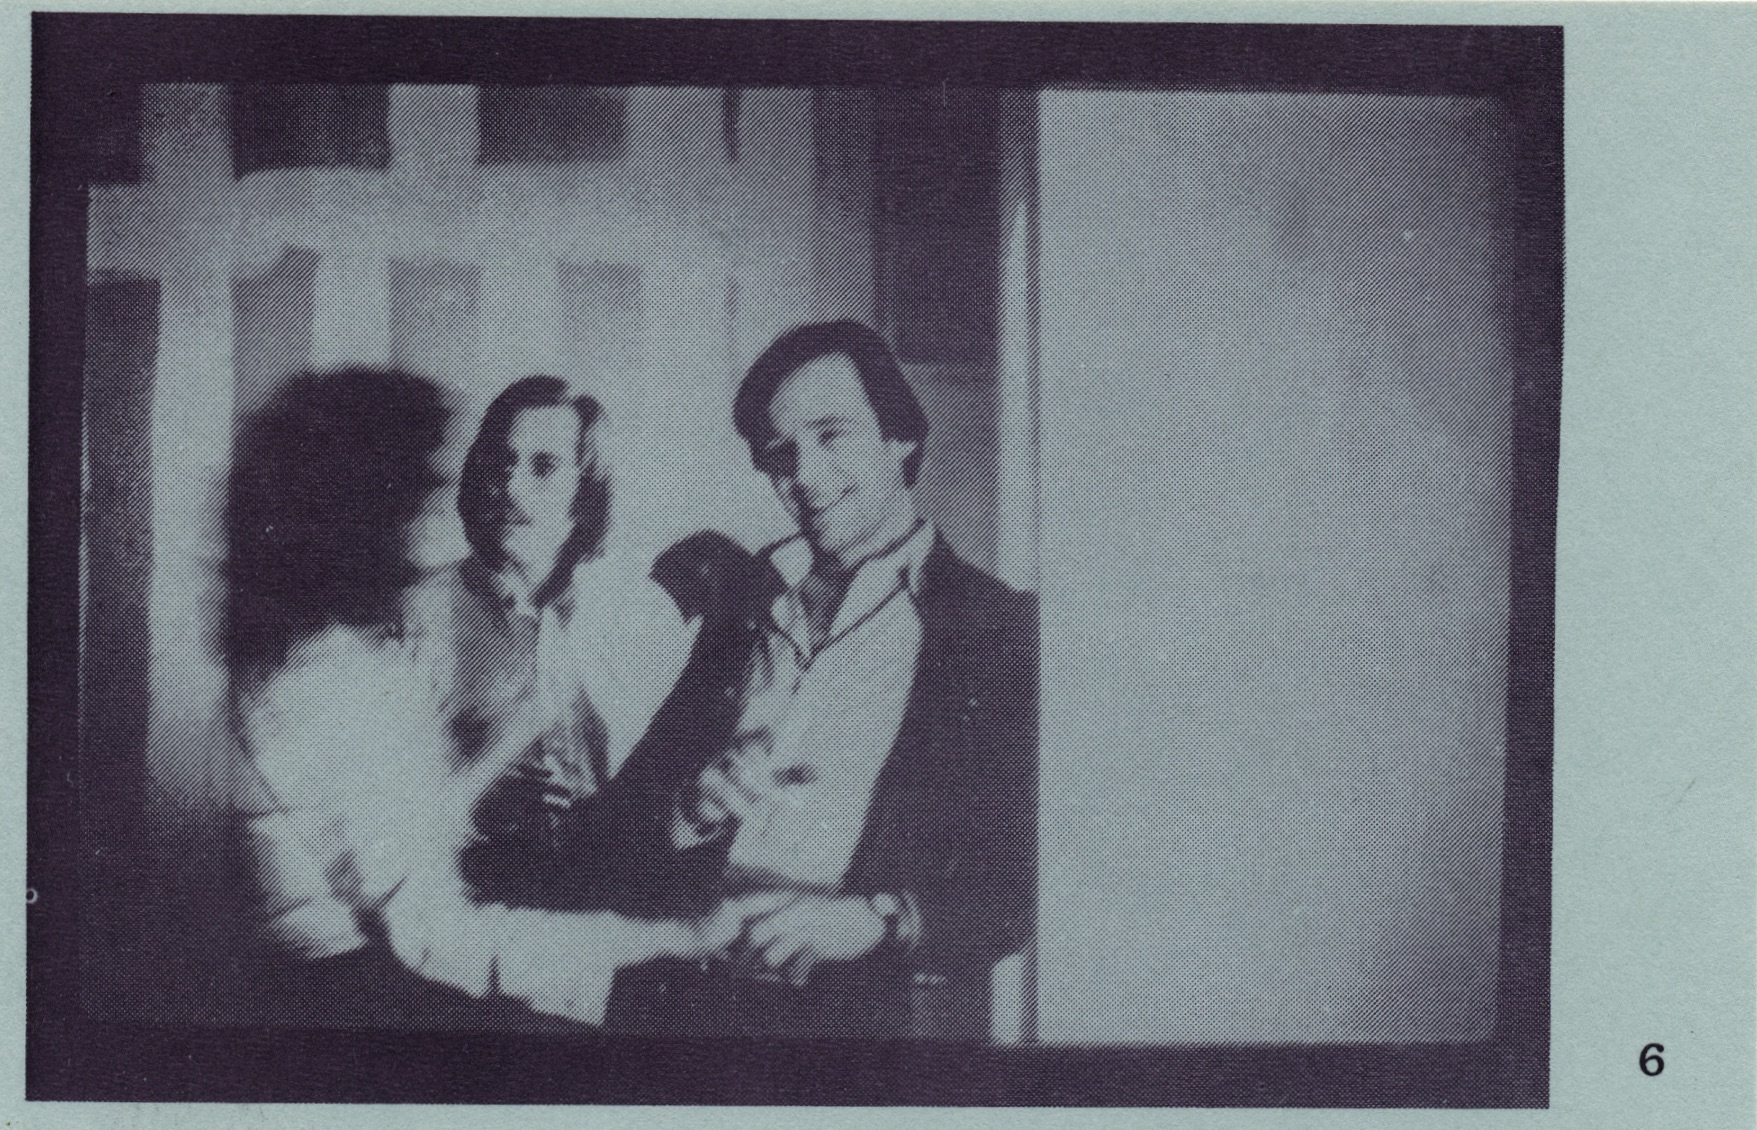 black and white image of three people engaged in coversation